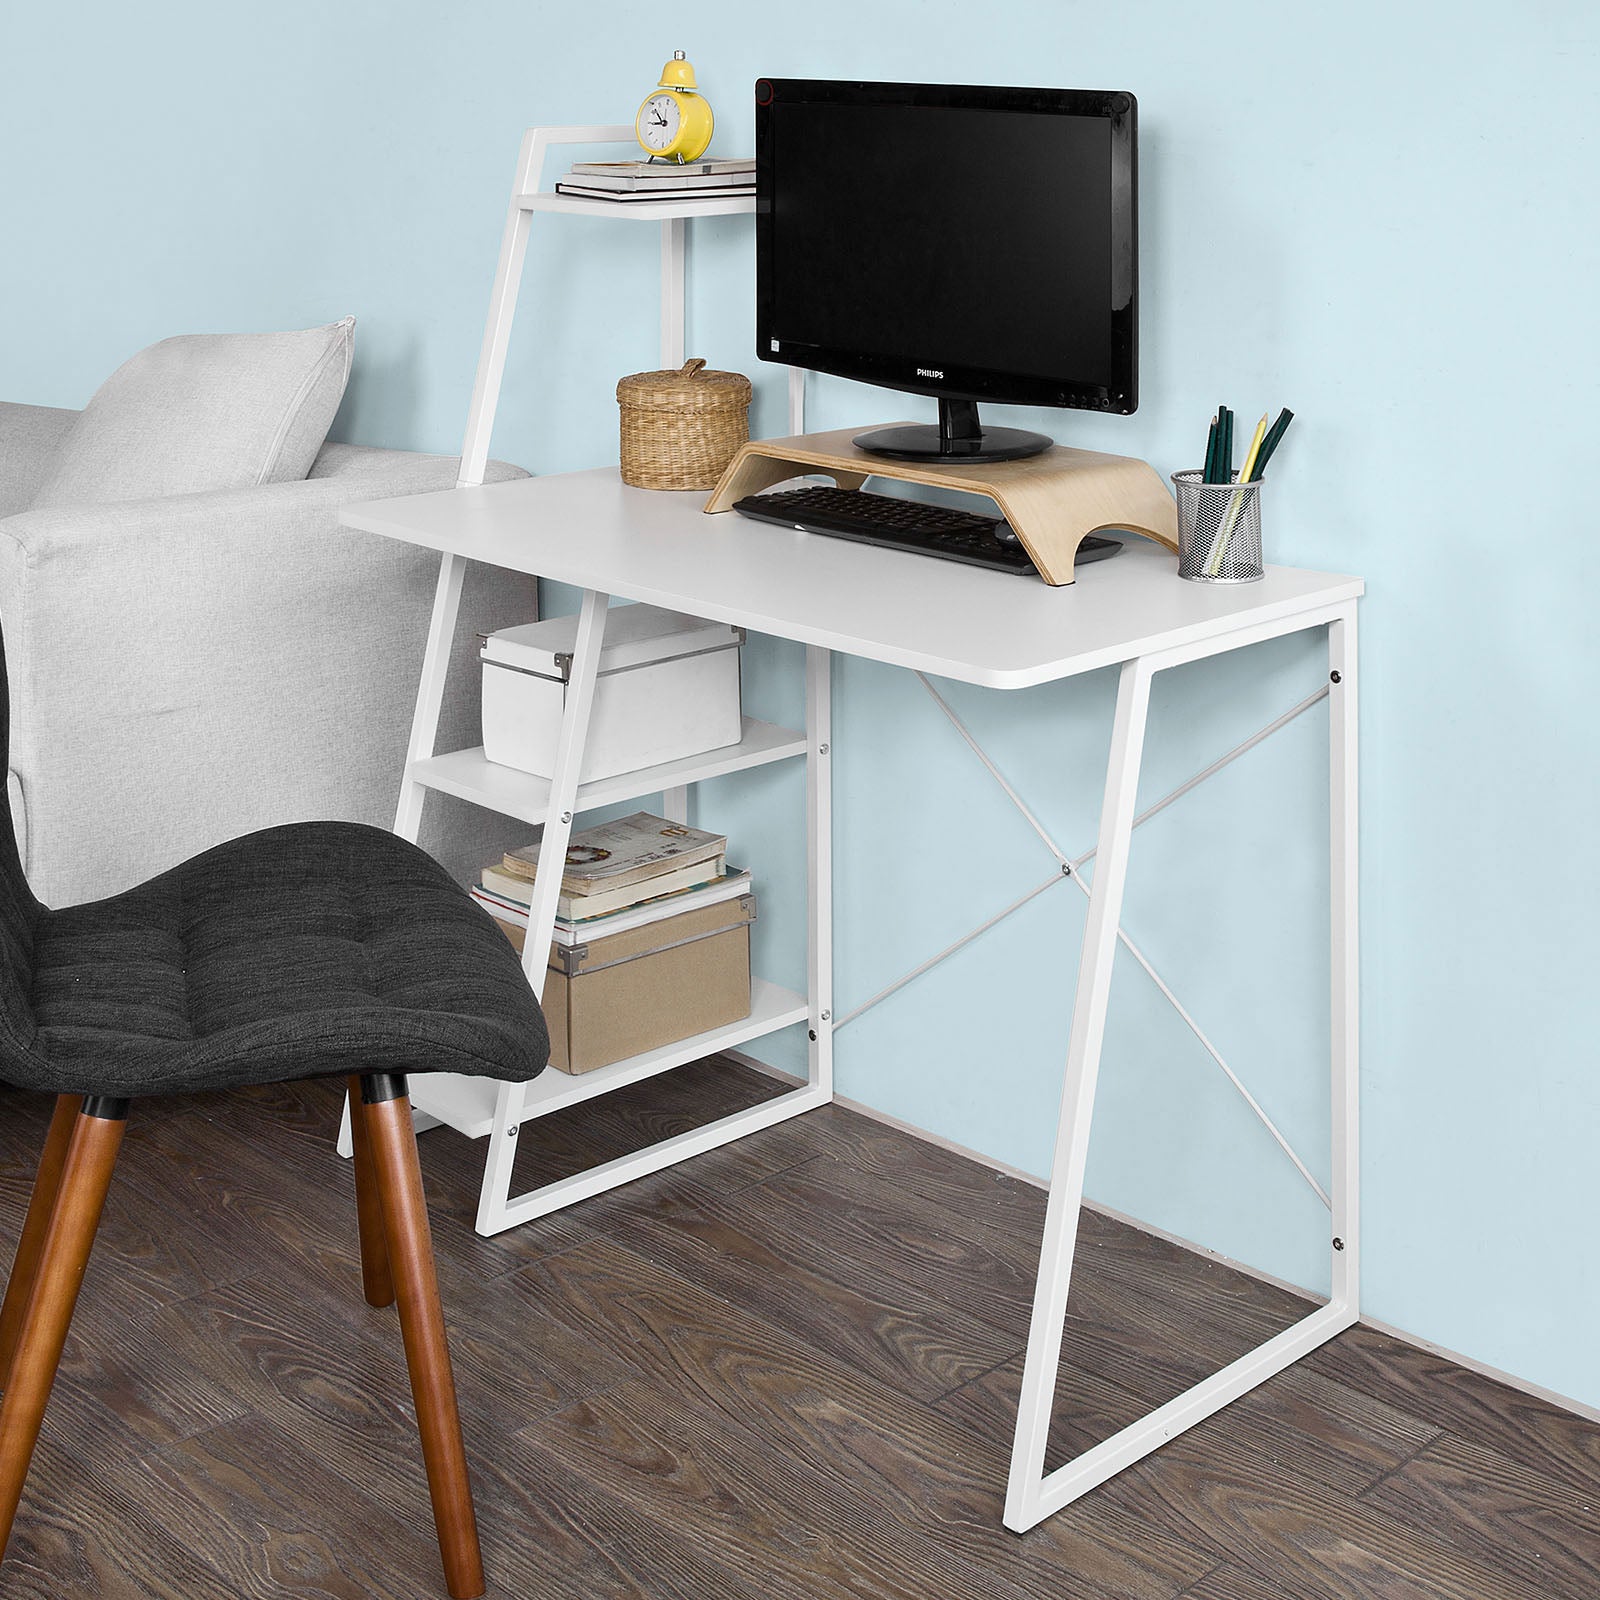 SoBuy Home White Office Wood Computer Table with Storage Rack,FWT29-W